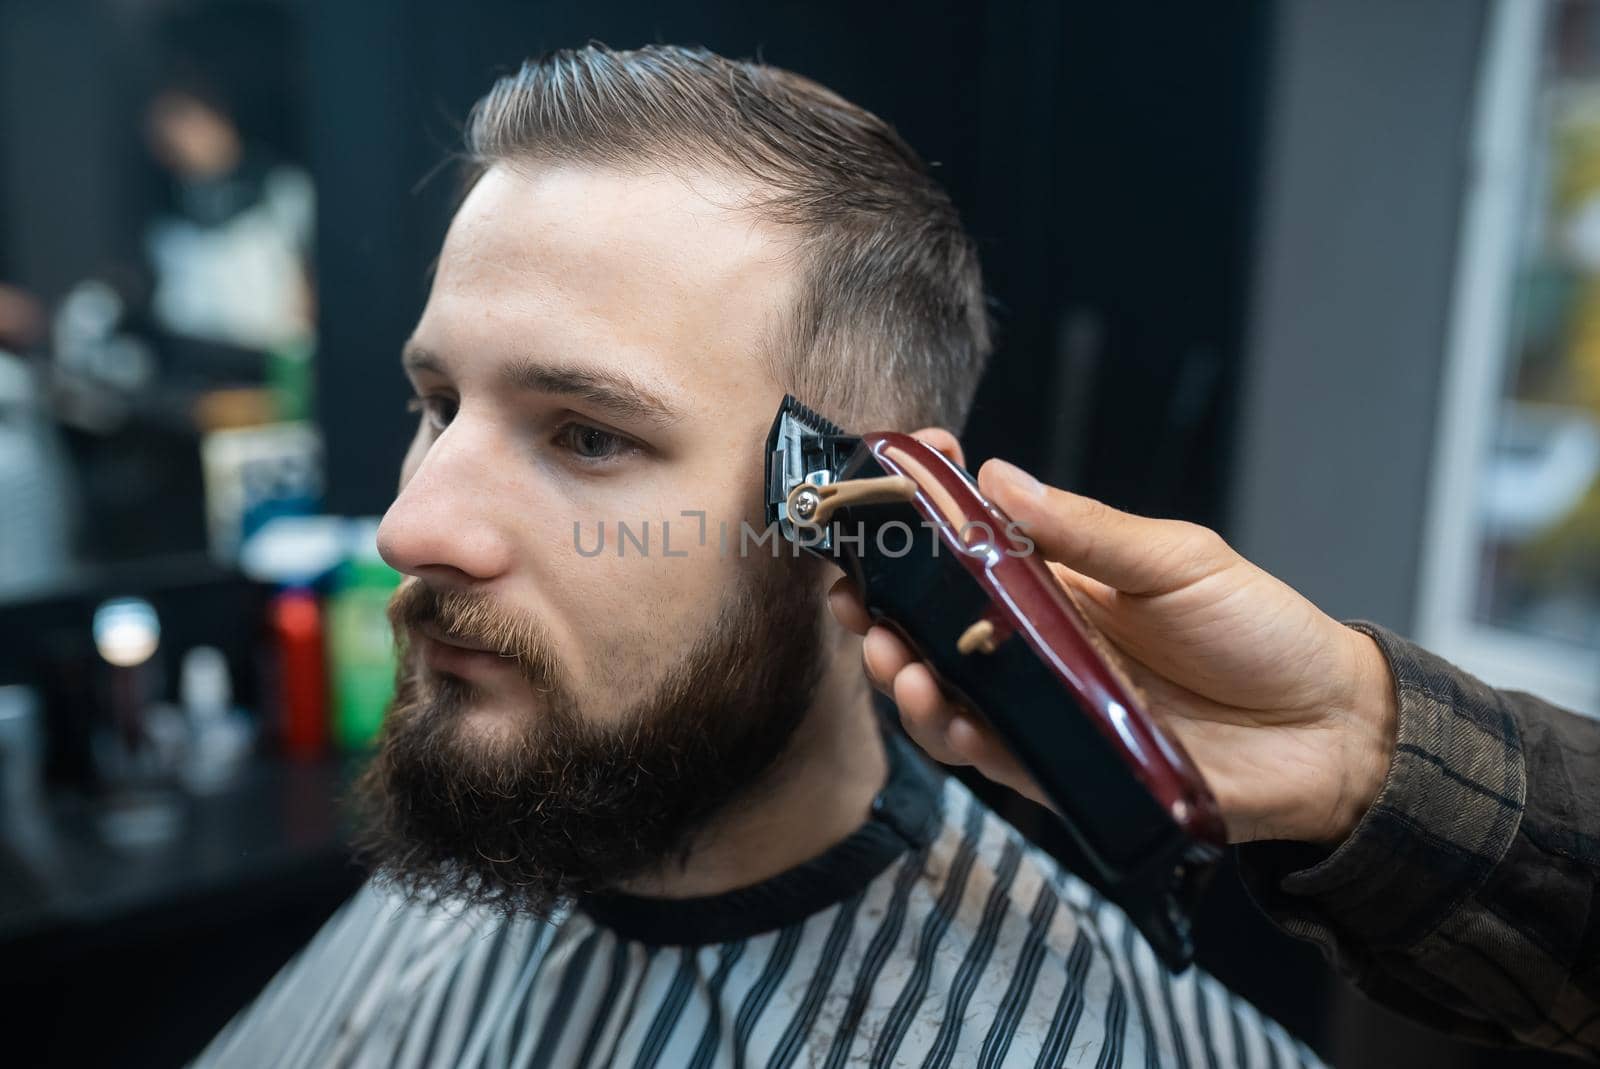 Men's hairstyling and haircutting with hair clipper in a barber shop or hair salon